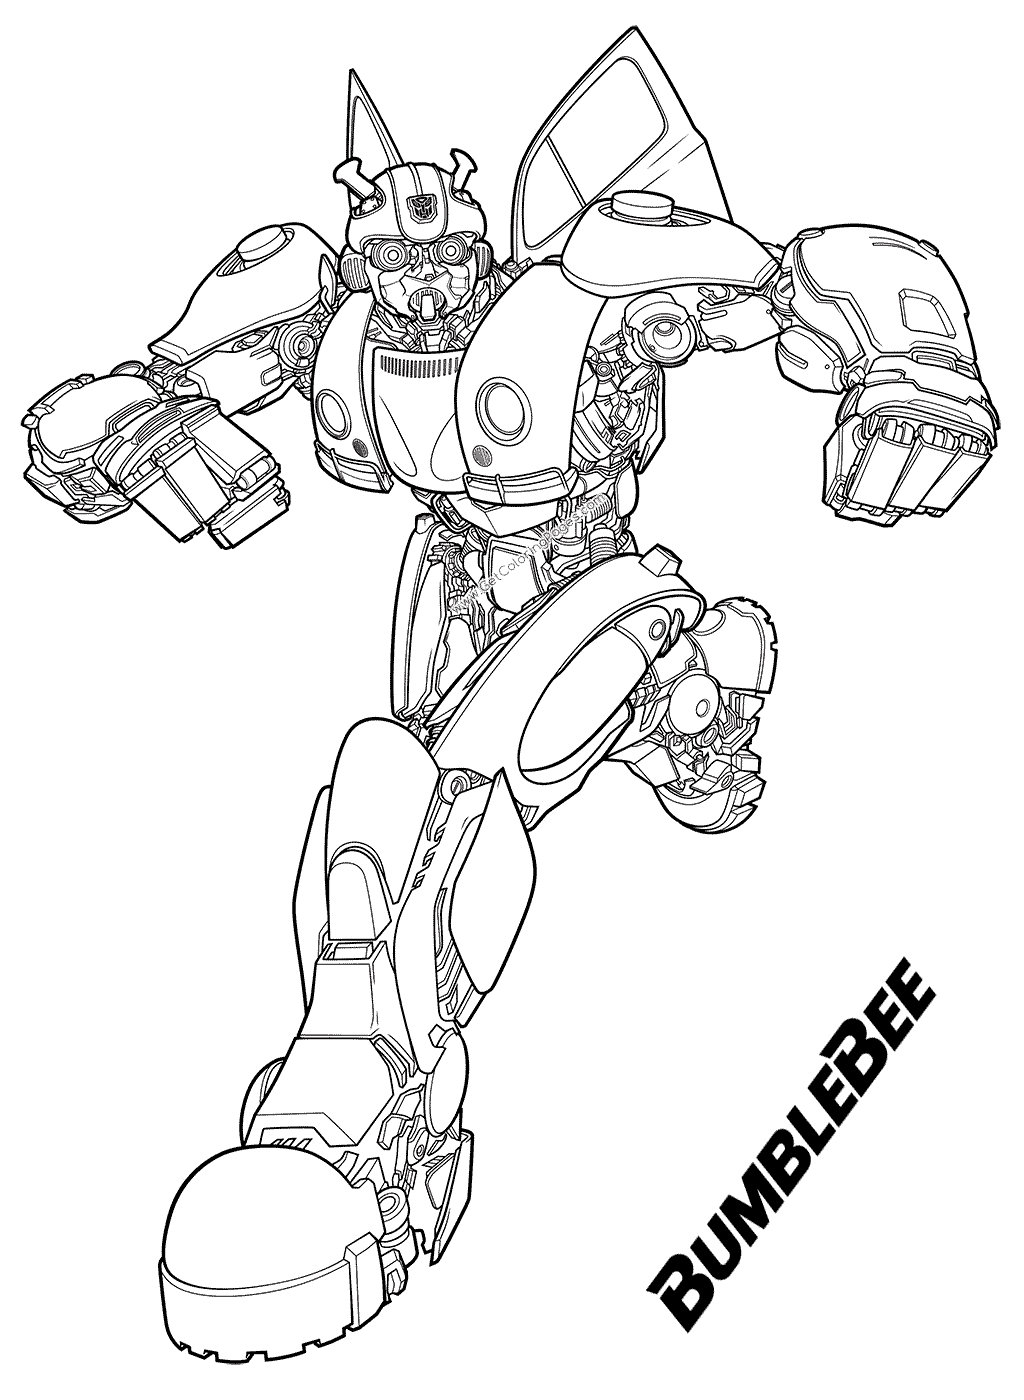 Autobot Bumblebee Coloring Pages